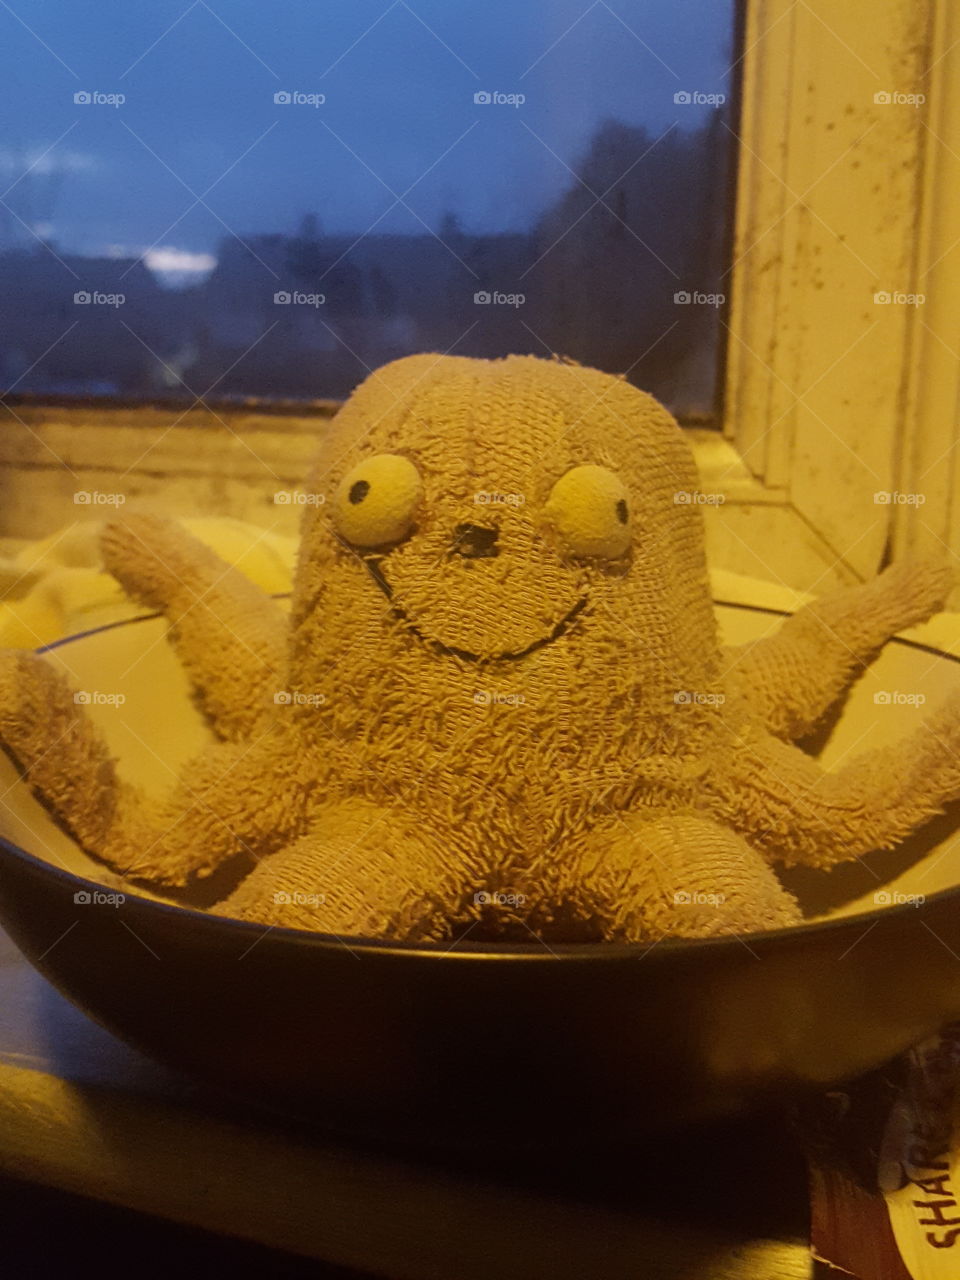 Mr Purple Octopus is chilling in a bowl